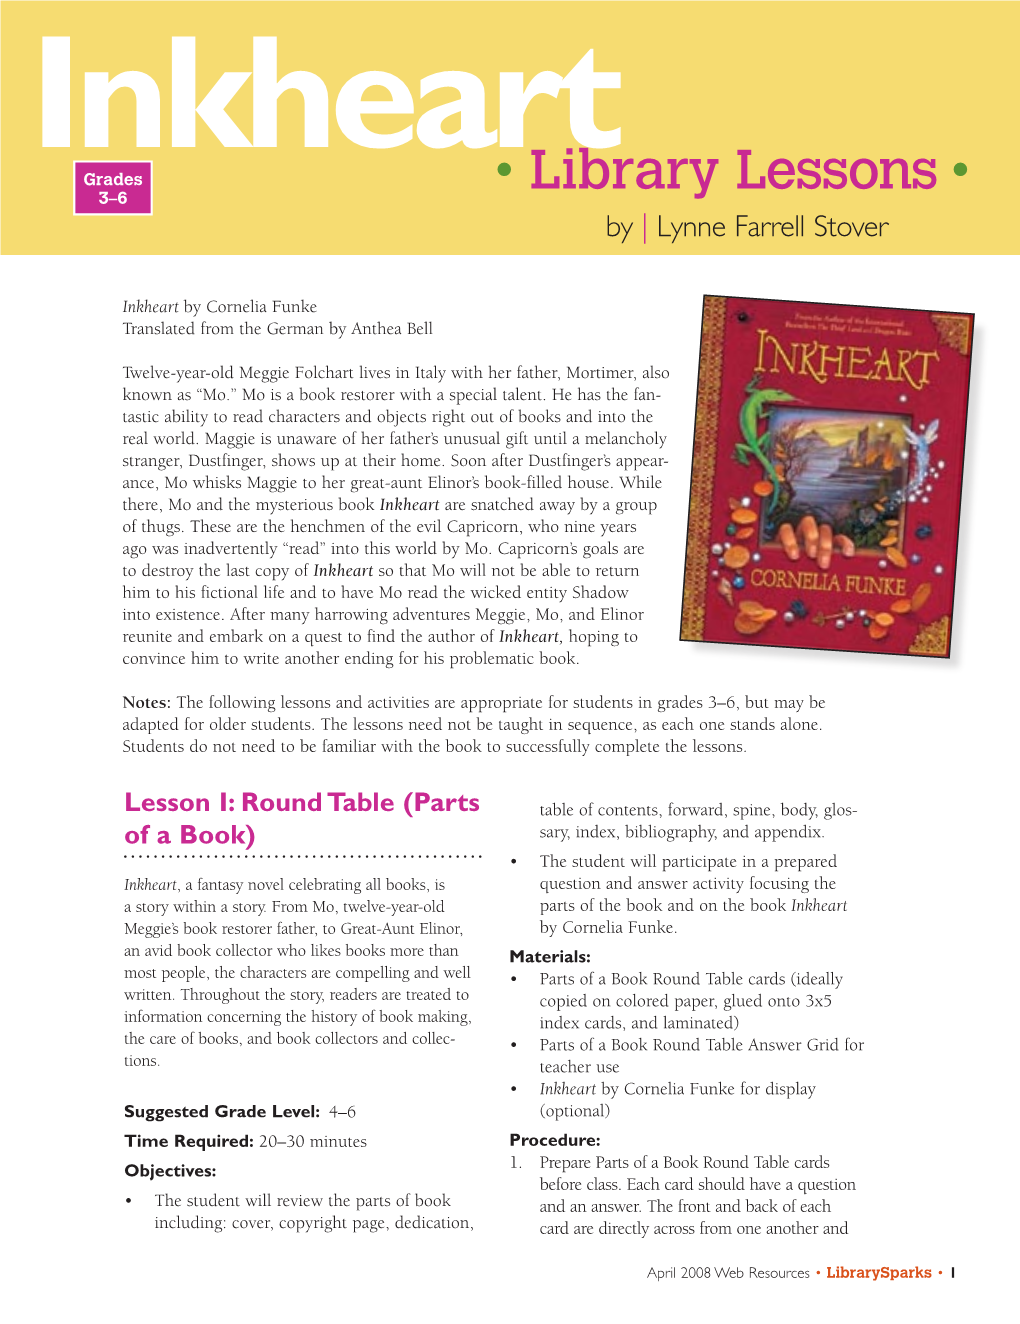 Library Lessons: Inkheart